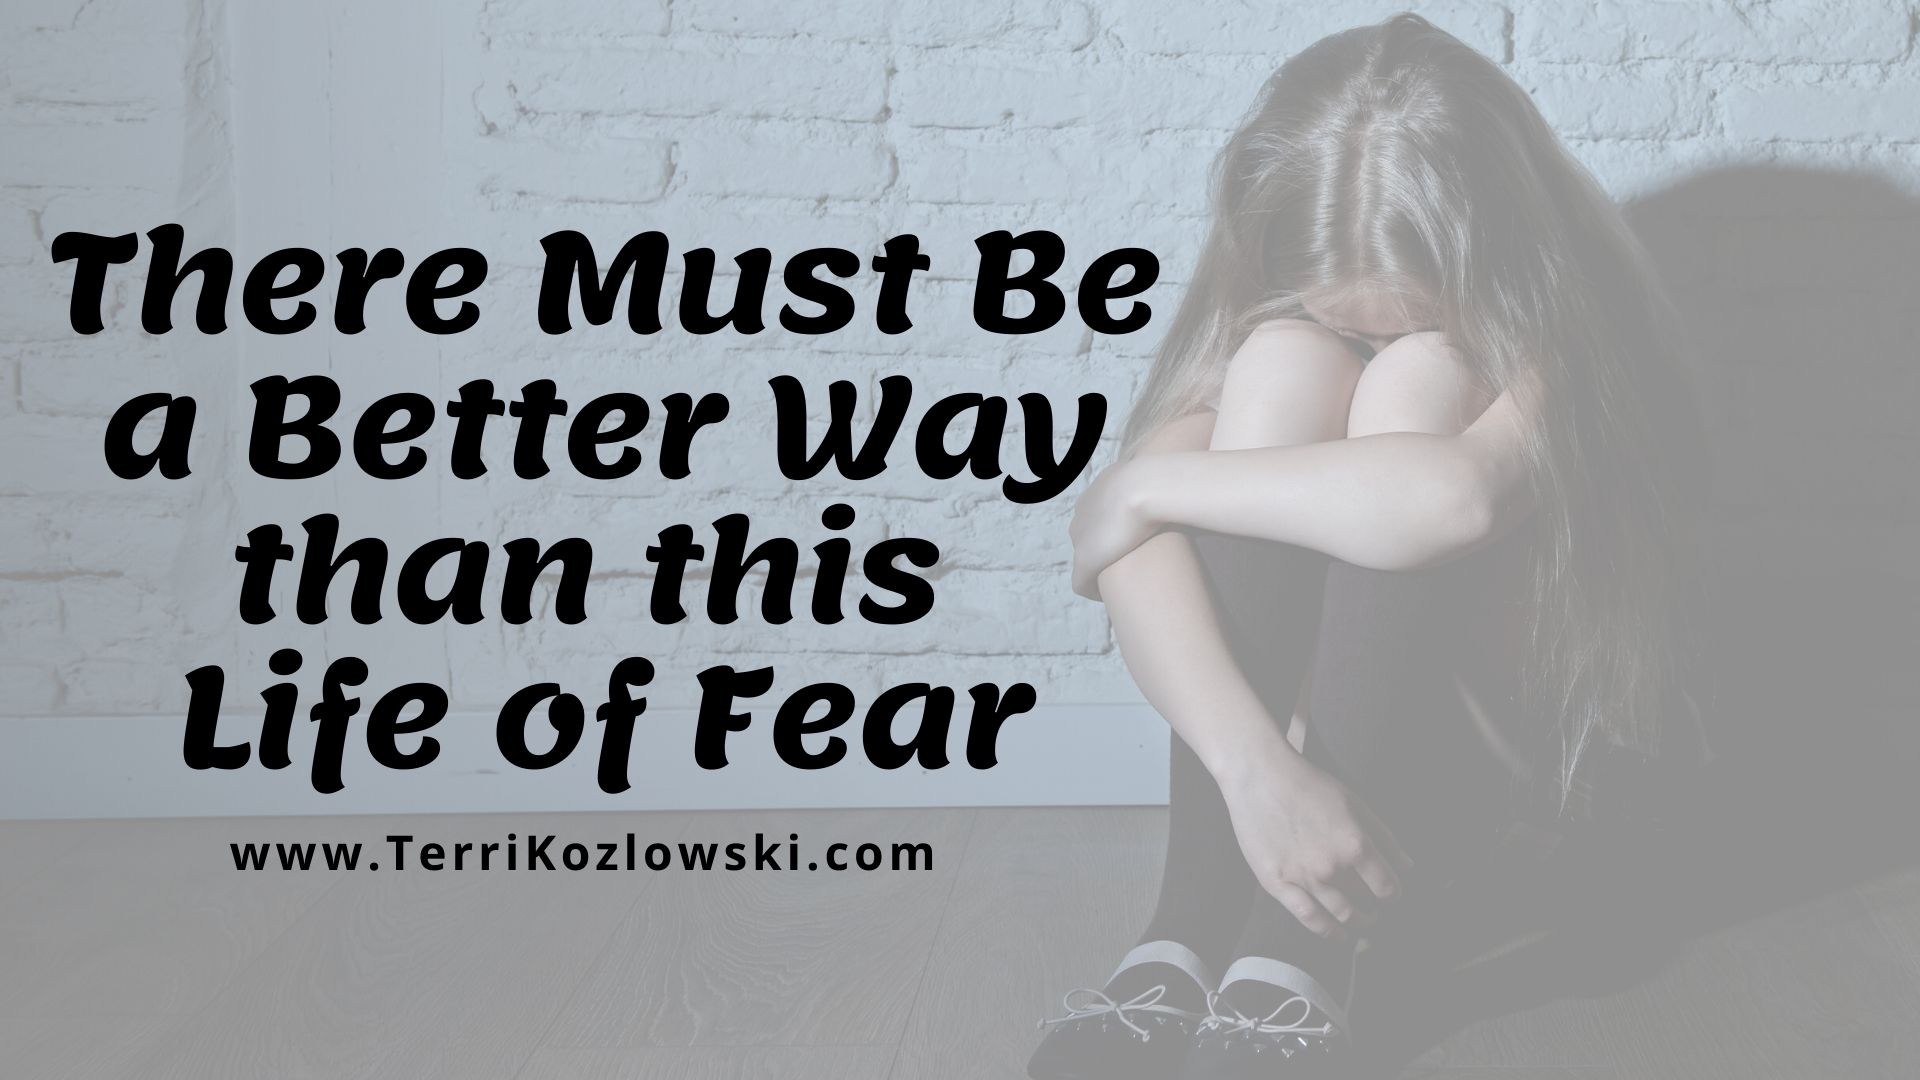 Overcoming a life of fear